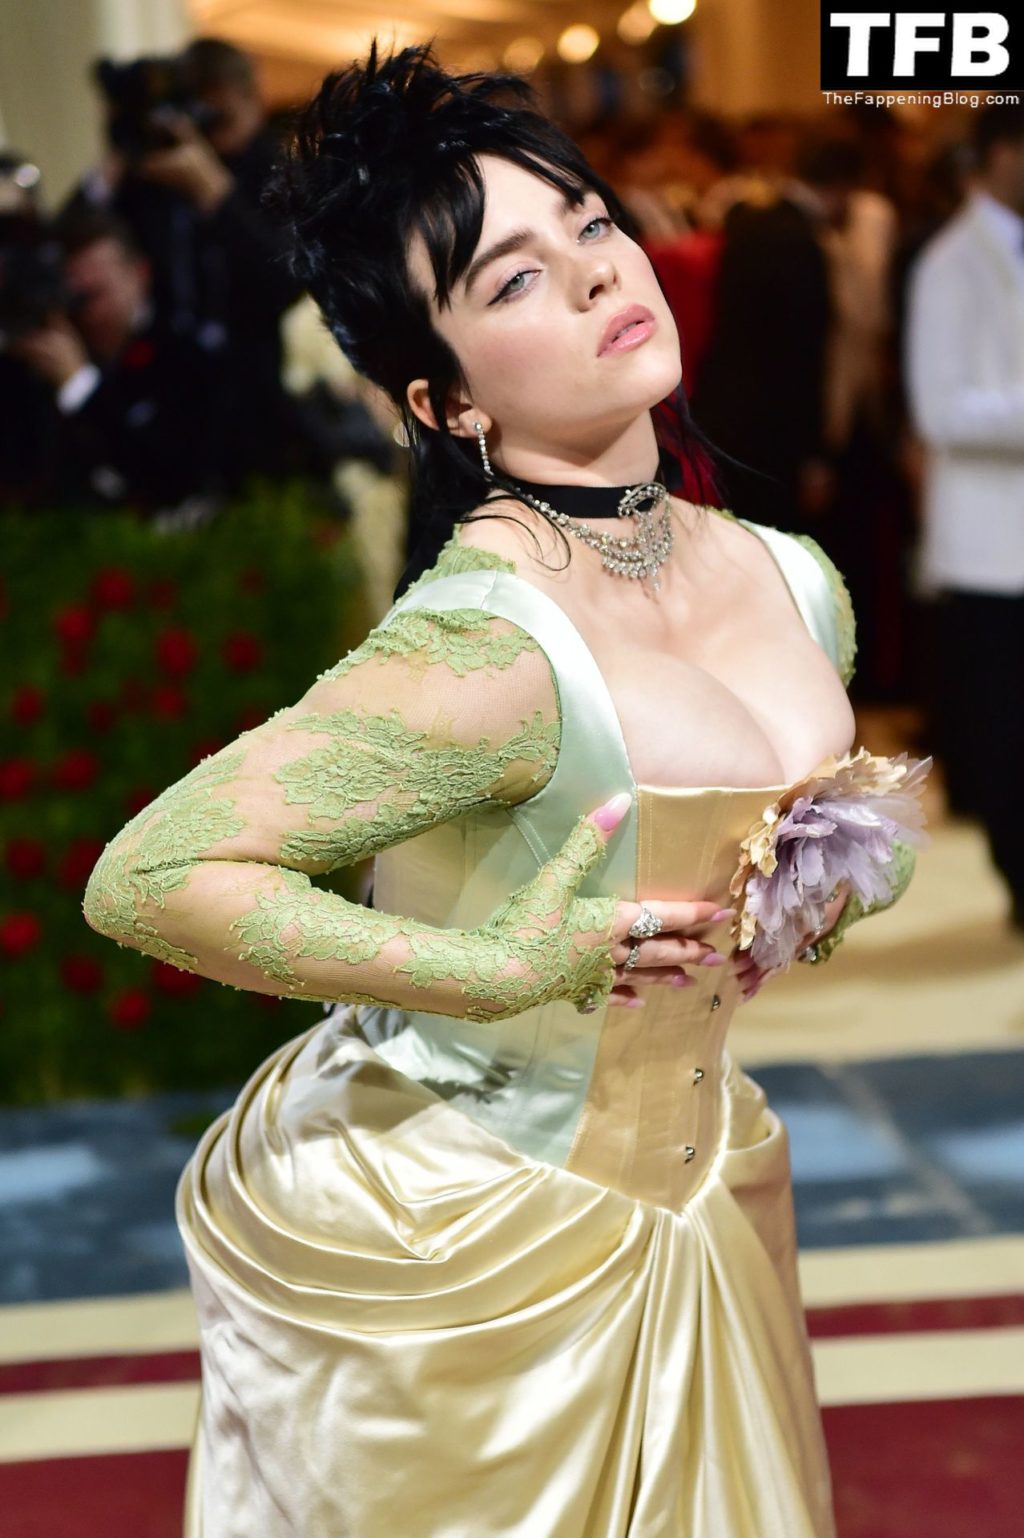 Billie Eilish Sexy The Fappening Blog 133 1024x1538 - Billie Eilish Showcases Nice Cleavage at The 2022 Met Gala in NYC (155 Photos)